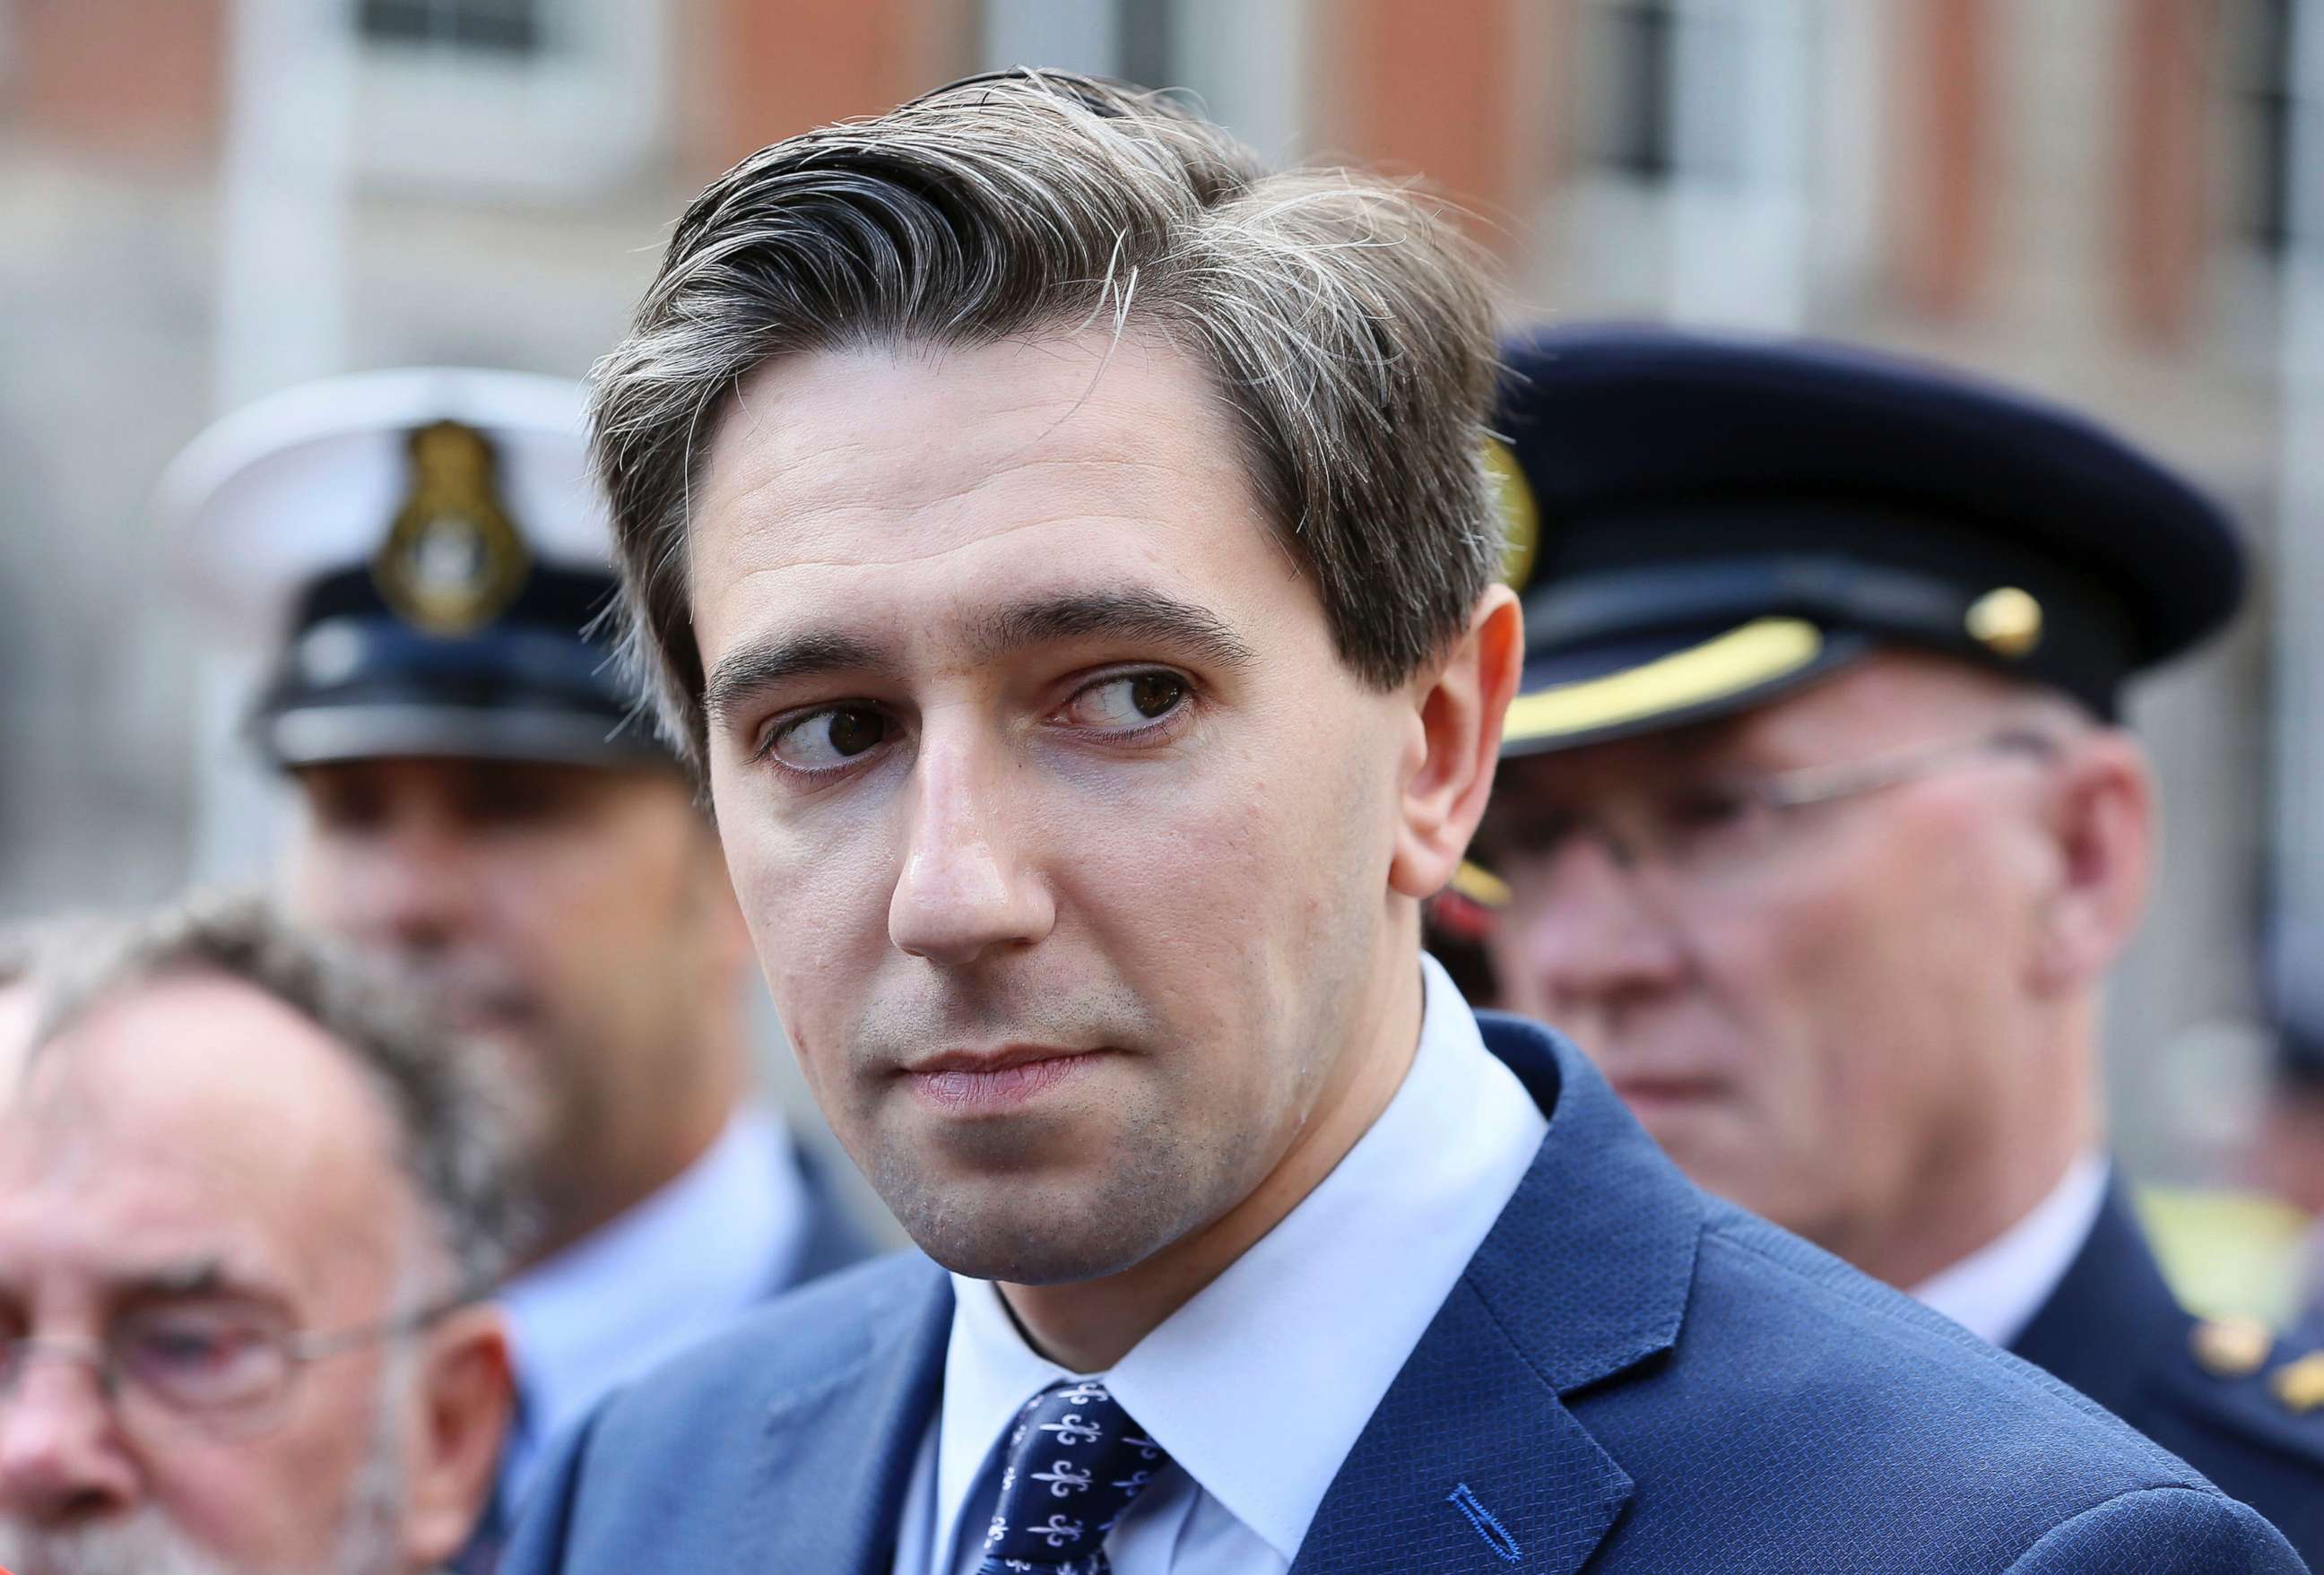 PHOTO: Minister for Health Simon Harris at the launch of a new national day to recognize the unsung heroes from frontline and emergency services at Dublin Castle, Aug. 29, 2018.